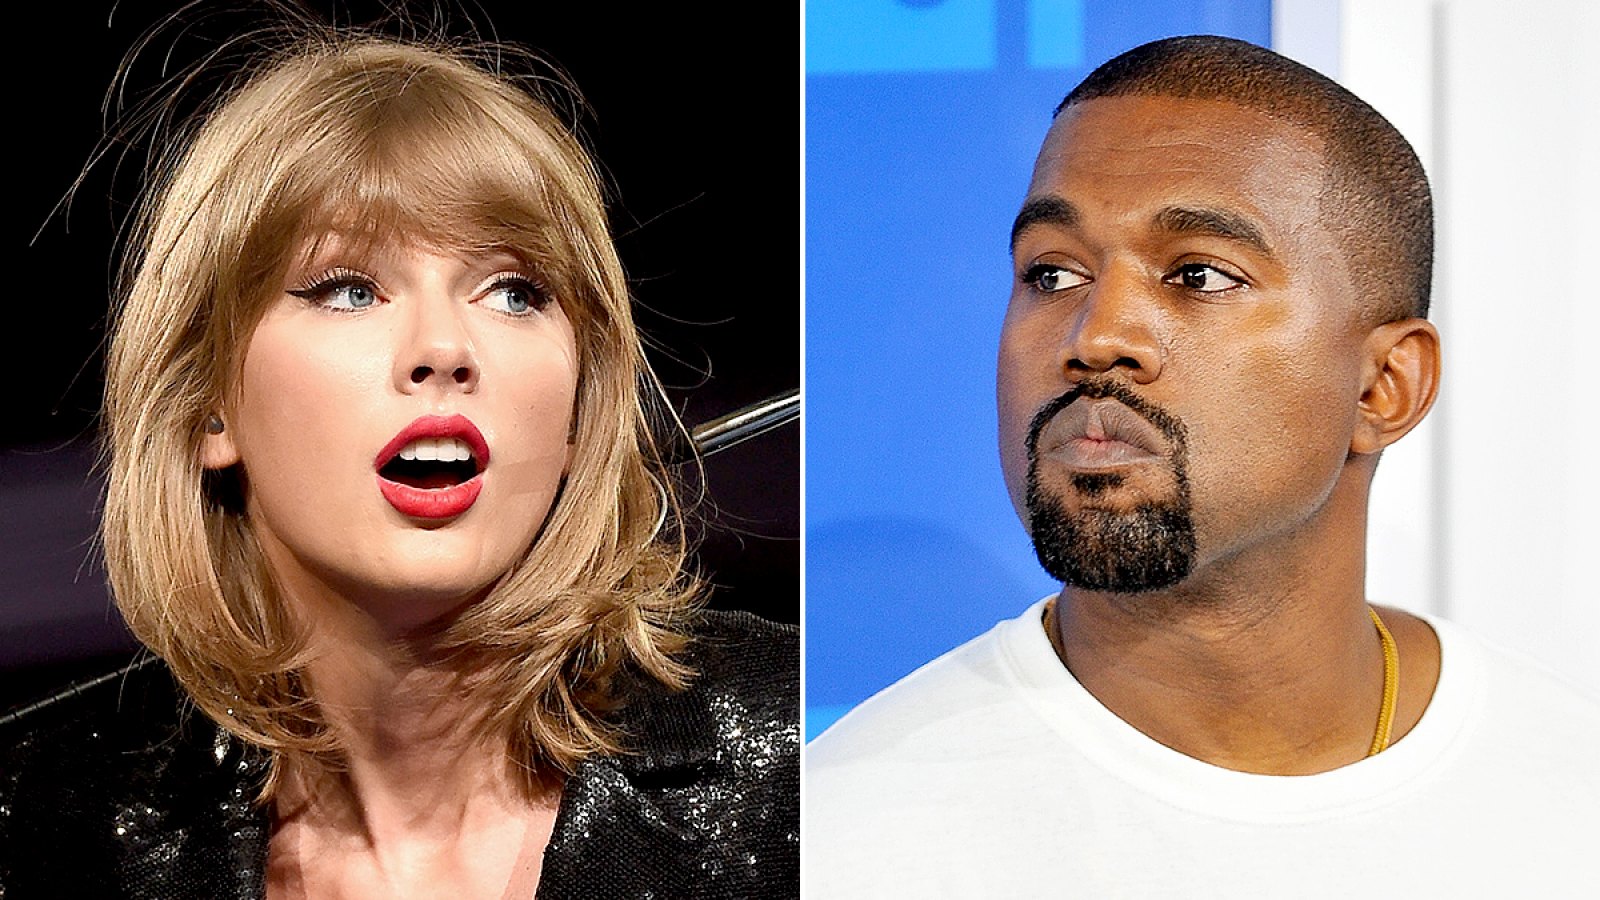 Taylor-Swift-Kanye-West-This-Is-Why-We-Can't-Have-Nice-Things